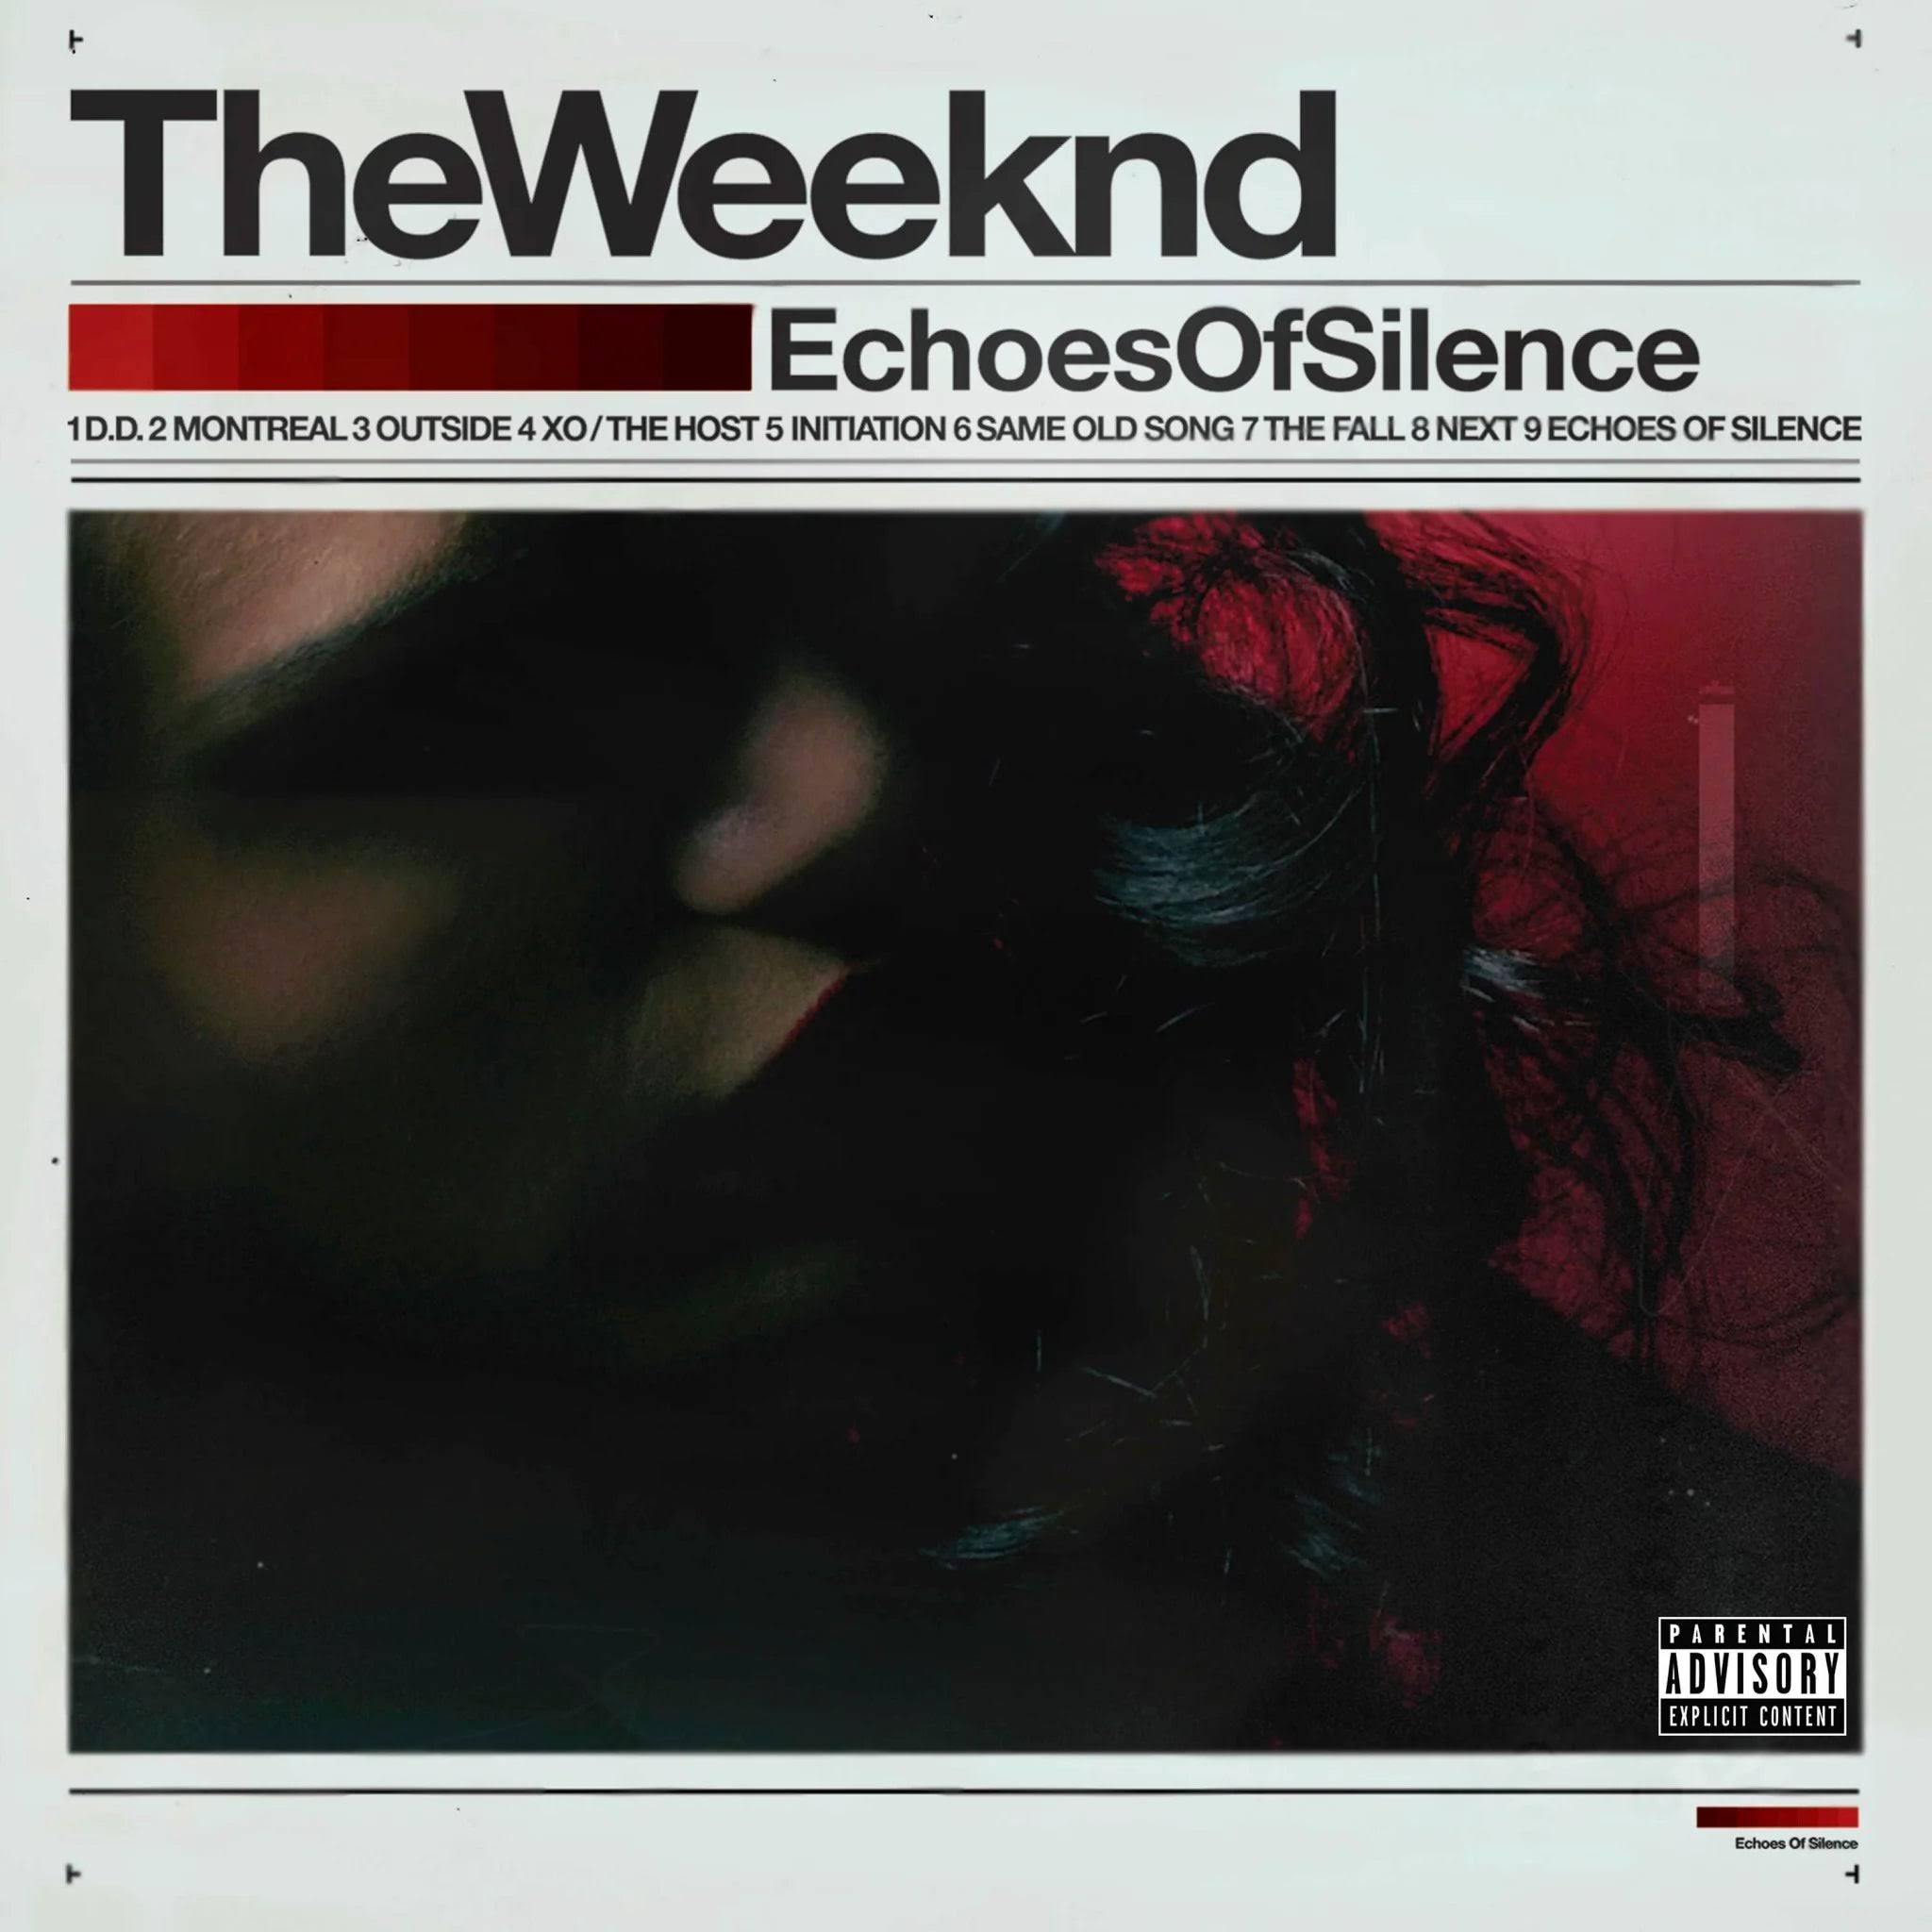 The Weeknd Echoes of Silence Vinyl Record LP Album